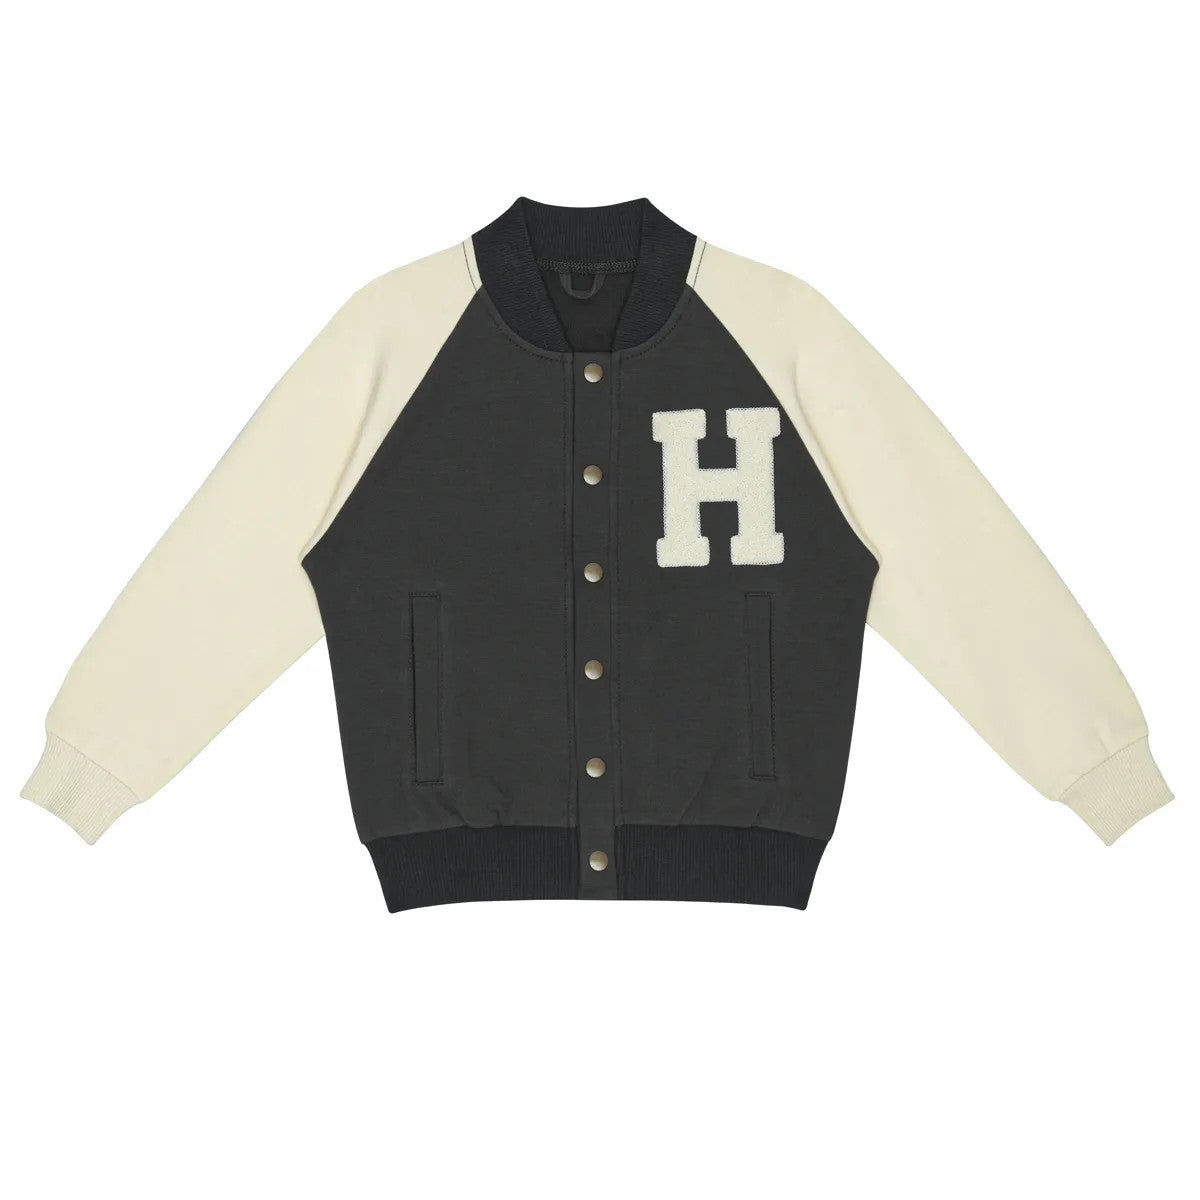 Little Hedonist organic sports jacket for boys and girls, in dark grey